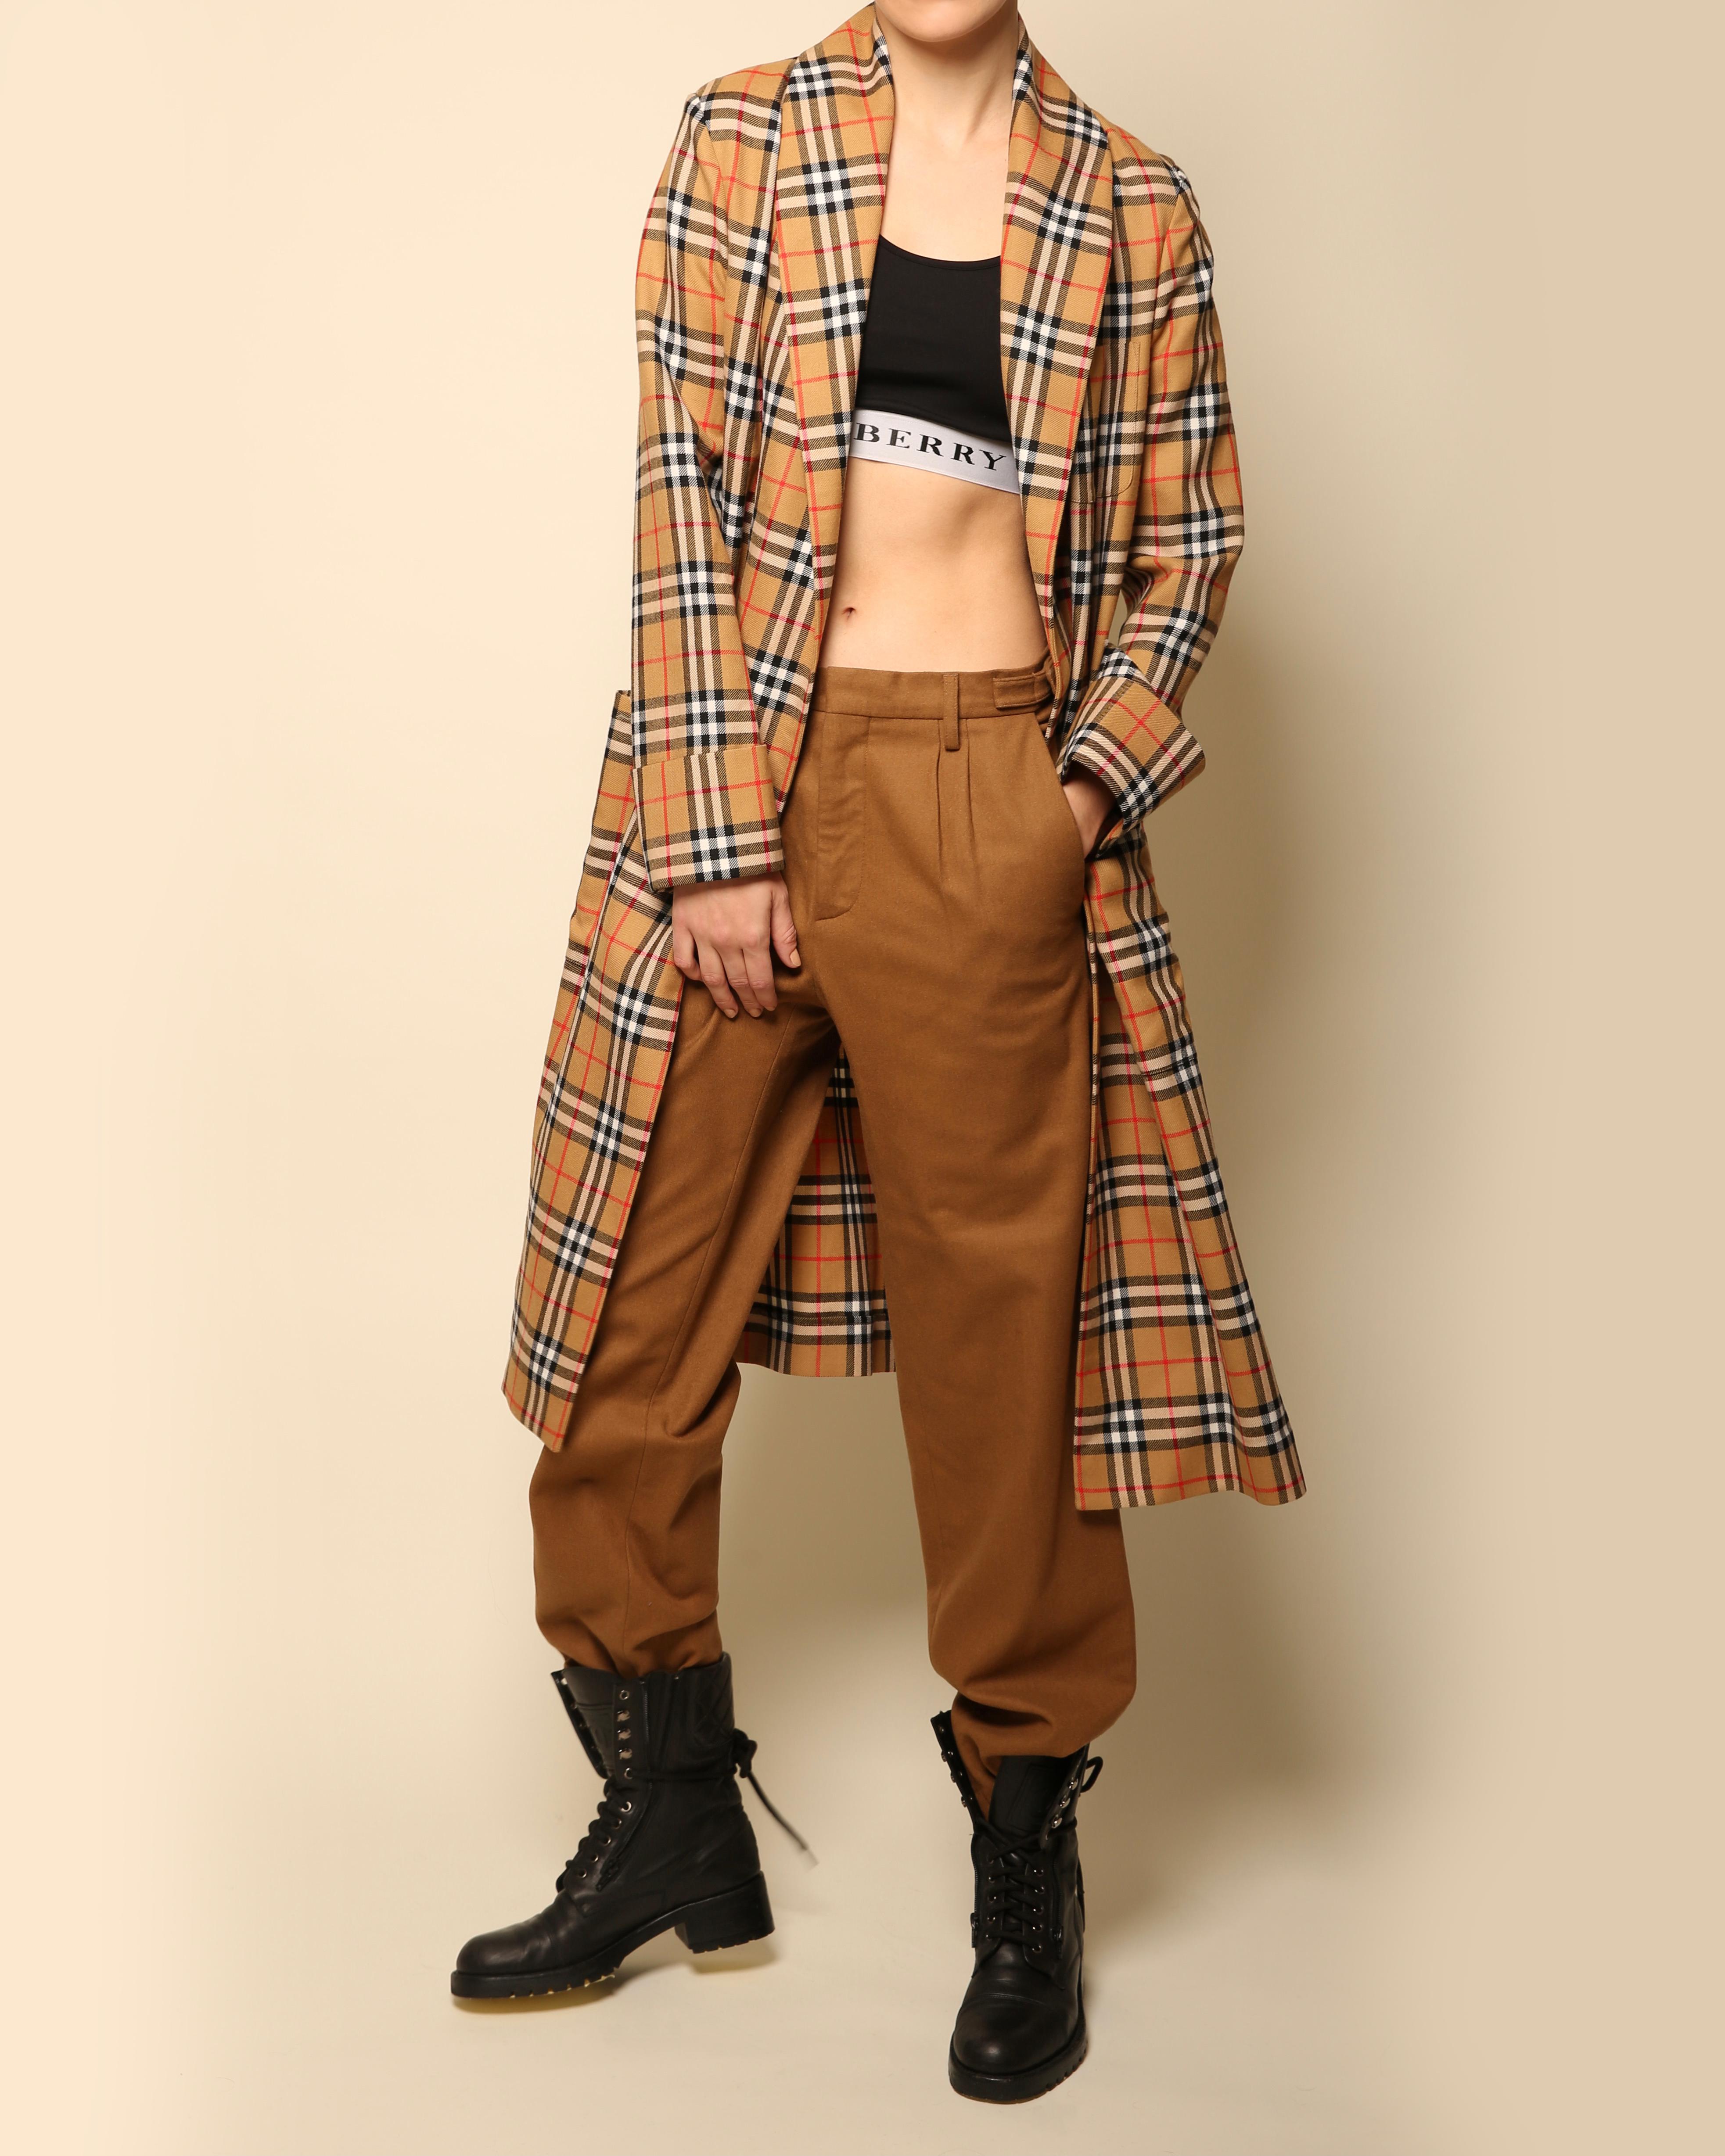 Burberry Fall 2018 oversized coat in classical Burberry plaid print 
Detachable belt
Two front pockets

Composition:
100% wool

Size: XS

Brand new with tags

Measurements:
Shoulder 16